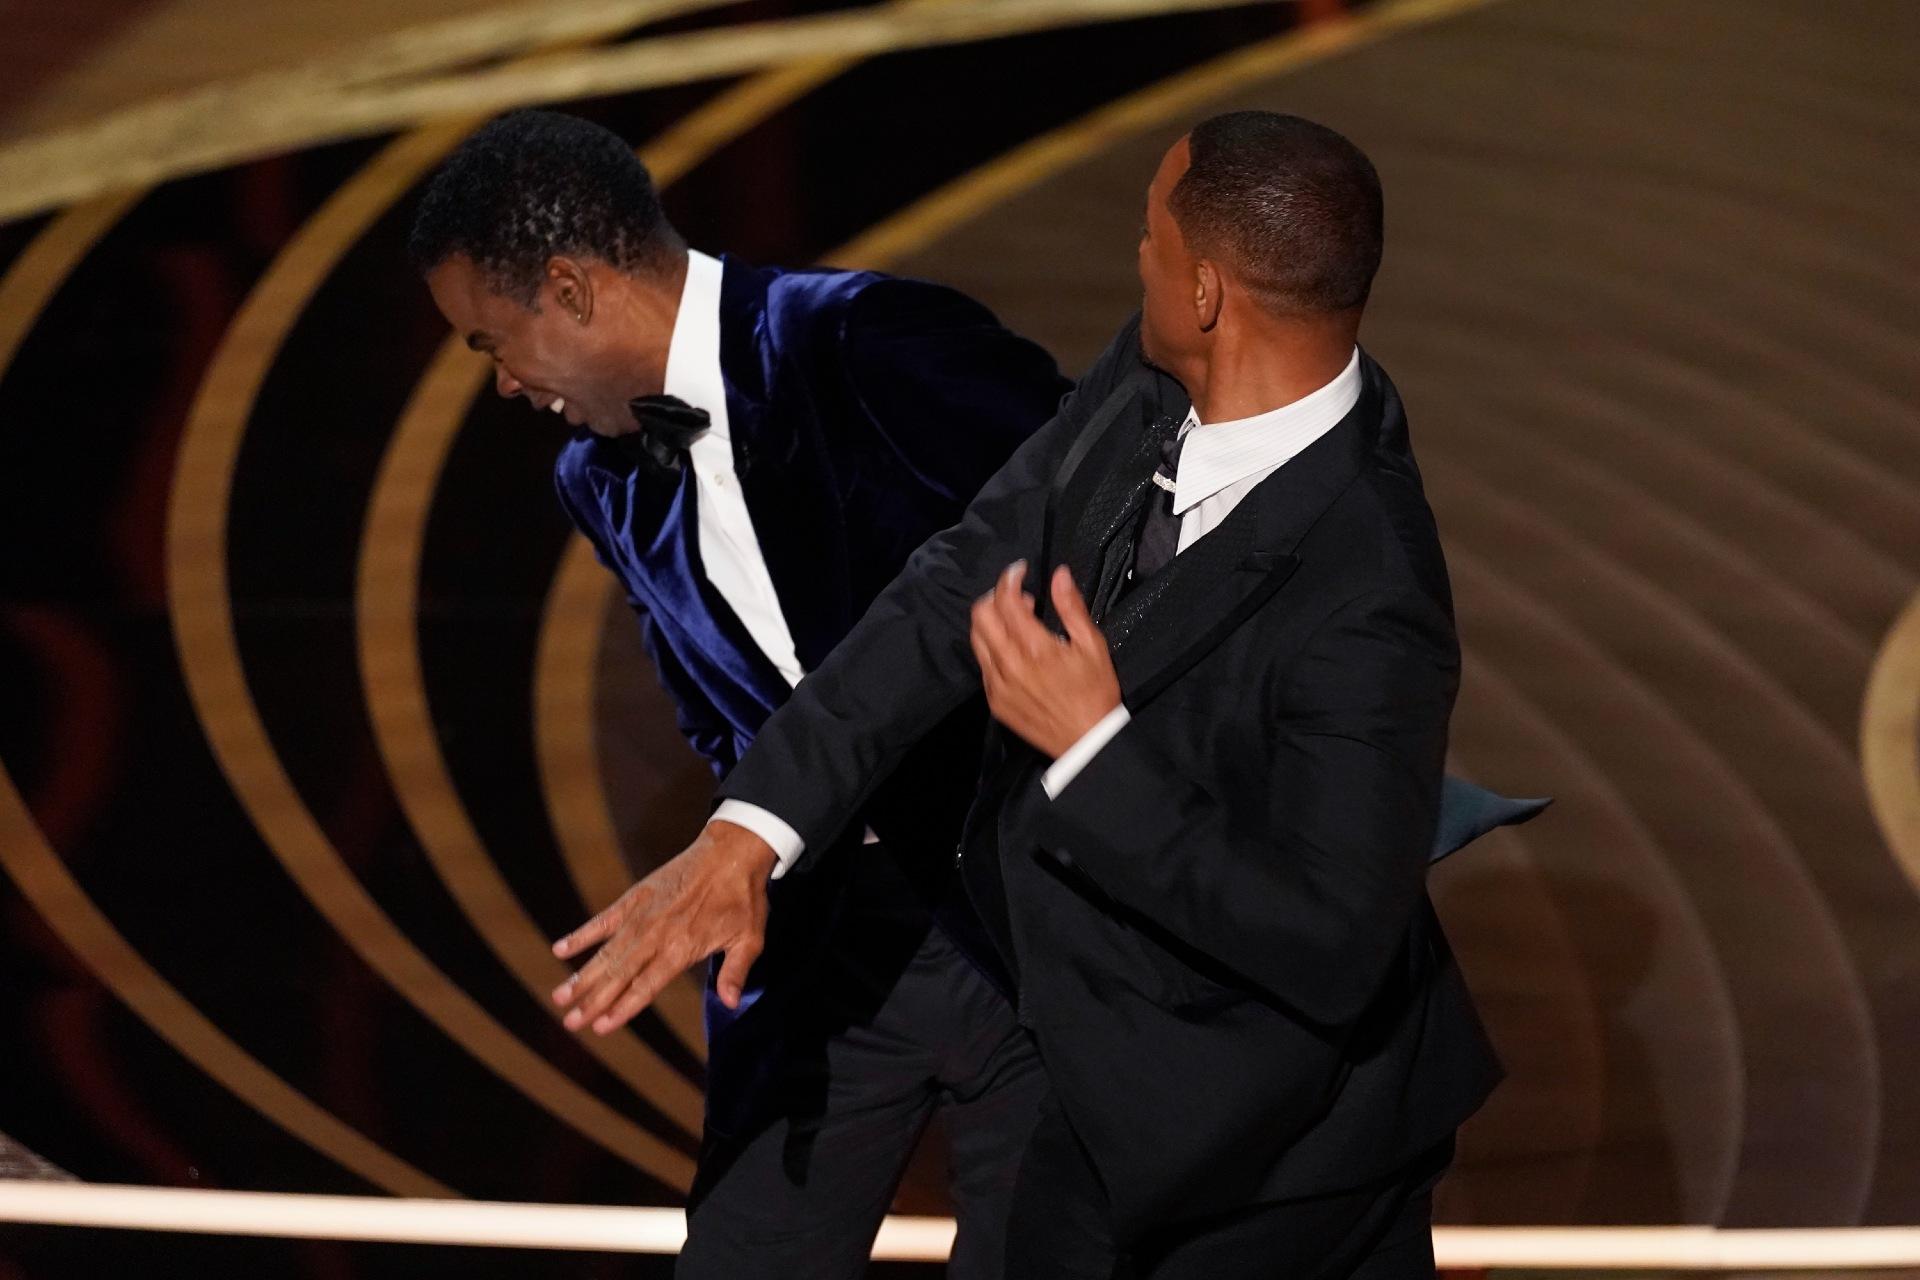 Will Smith, right, hits presenter Chris Rock on stage while presenting the award for best documentary feature at the Oscars on Sunday, March 27, 2022, at the Dolby Theatre in Los Angeles. (AP Photo / Chris Pizzello)